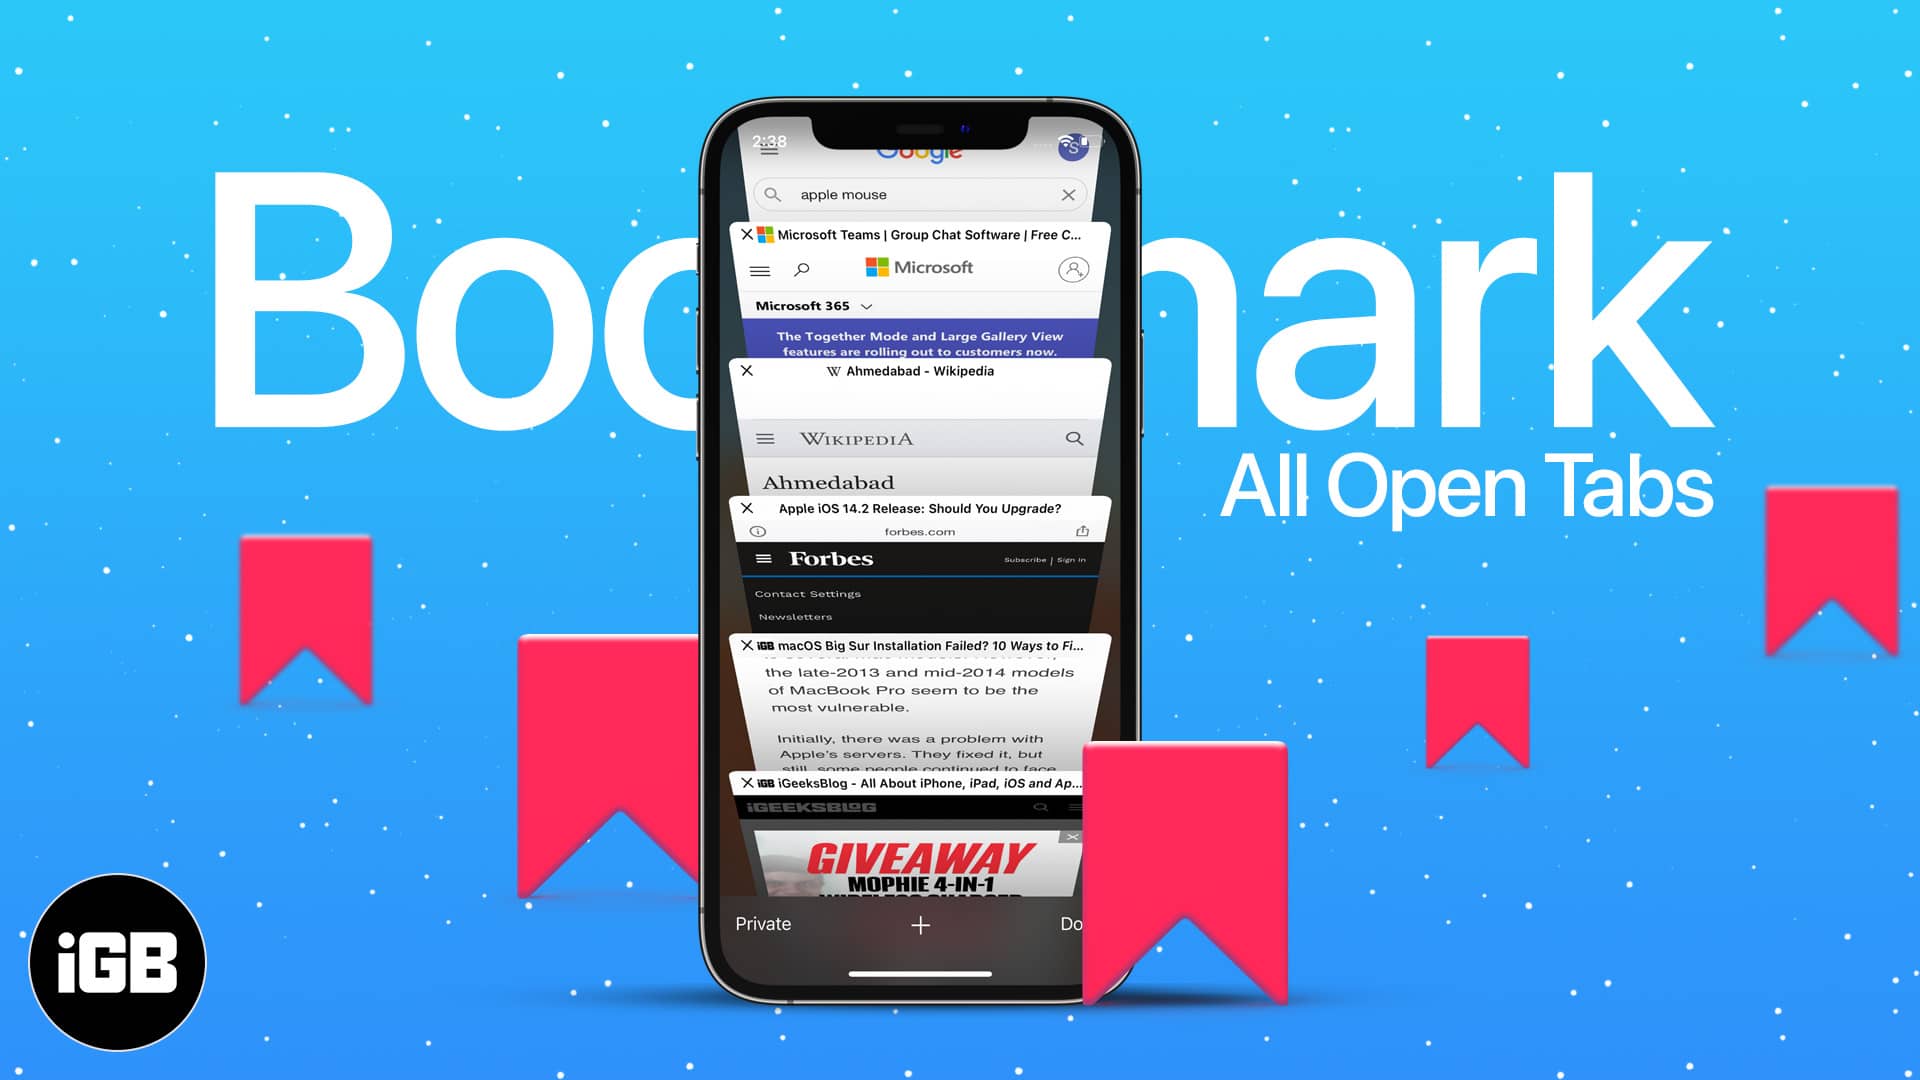 How to bookmark all open Safari tabs at once on iPhone